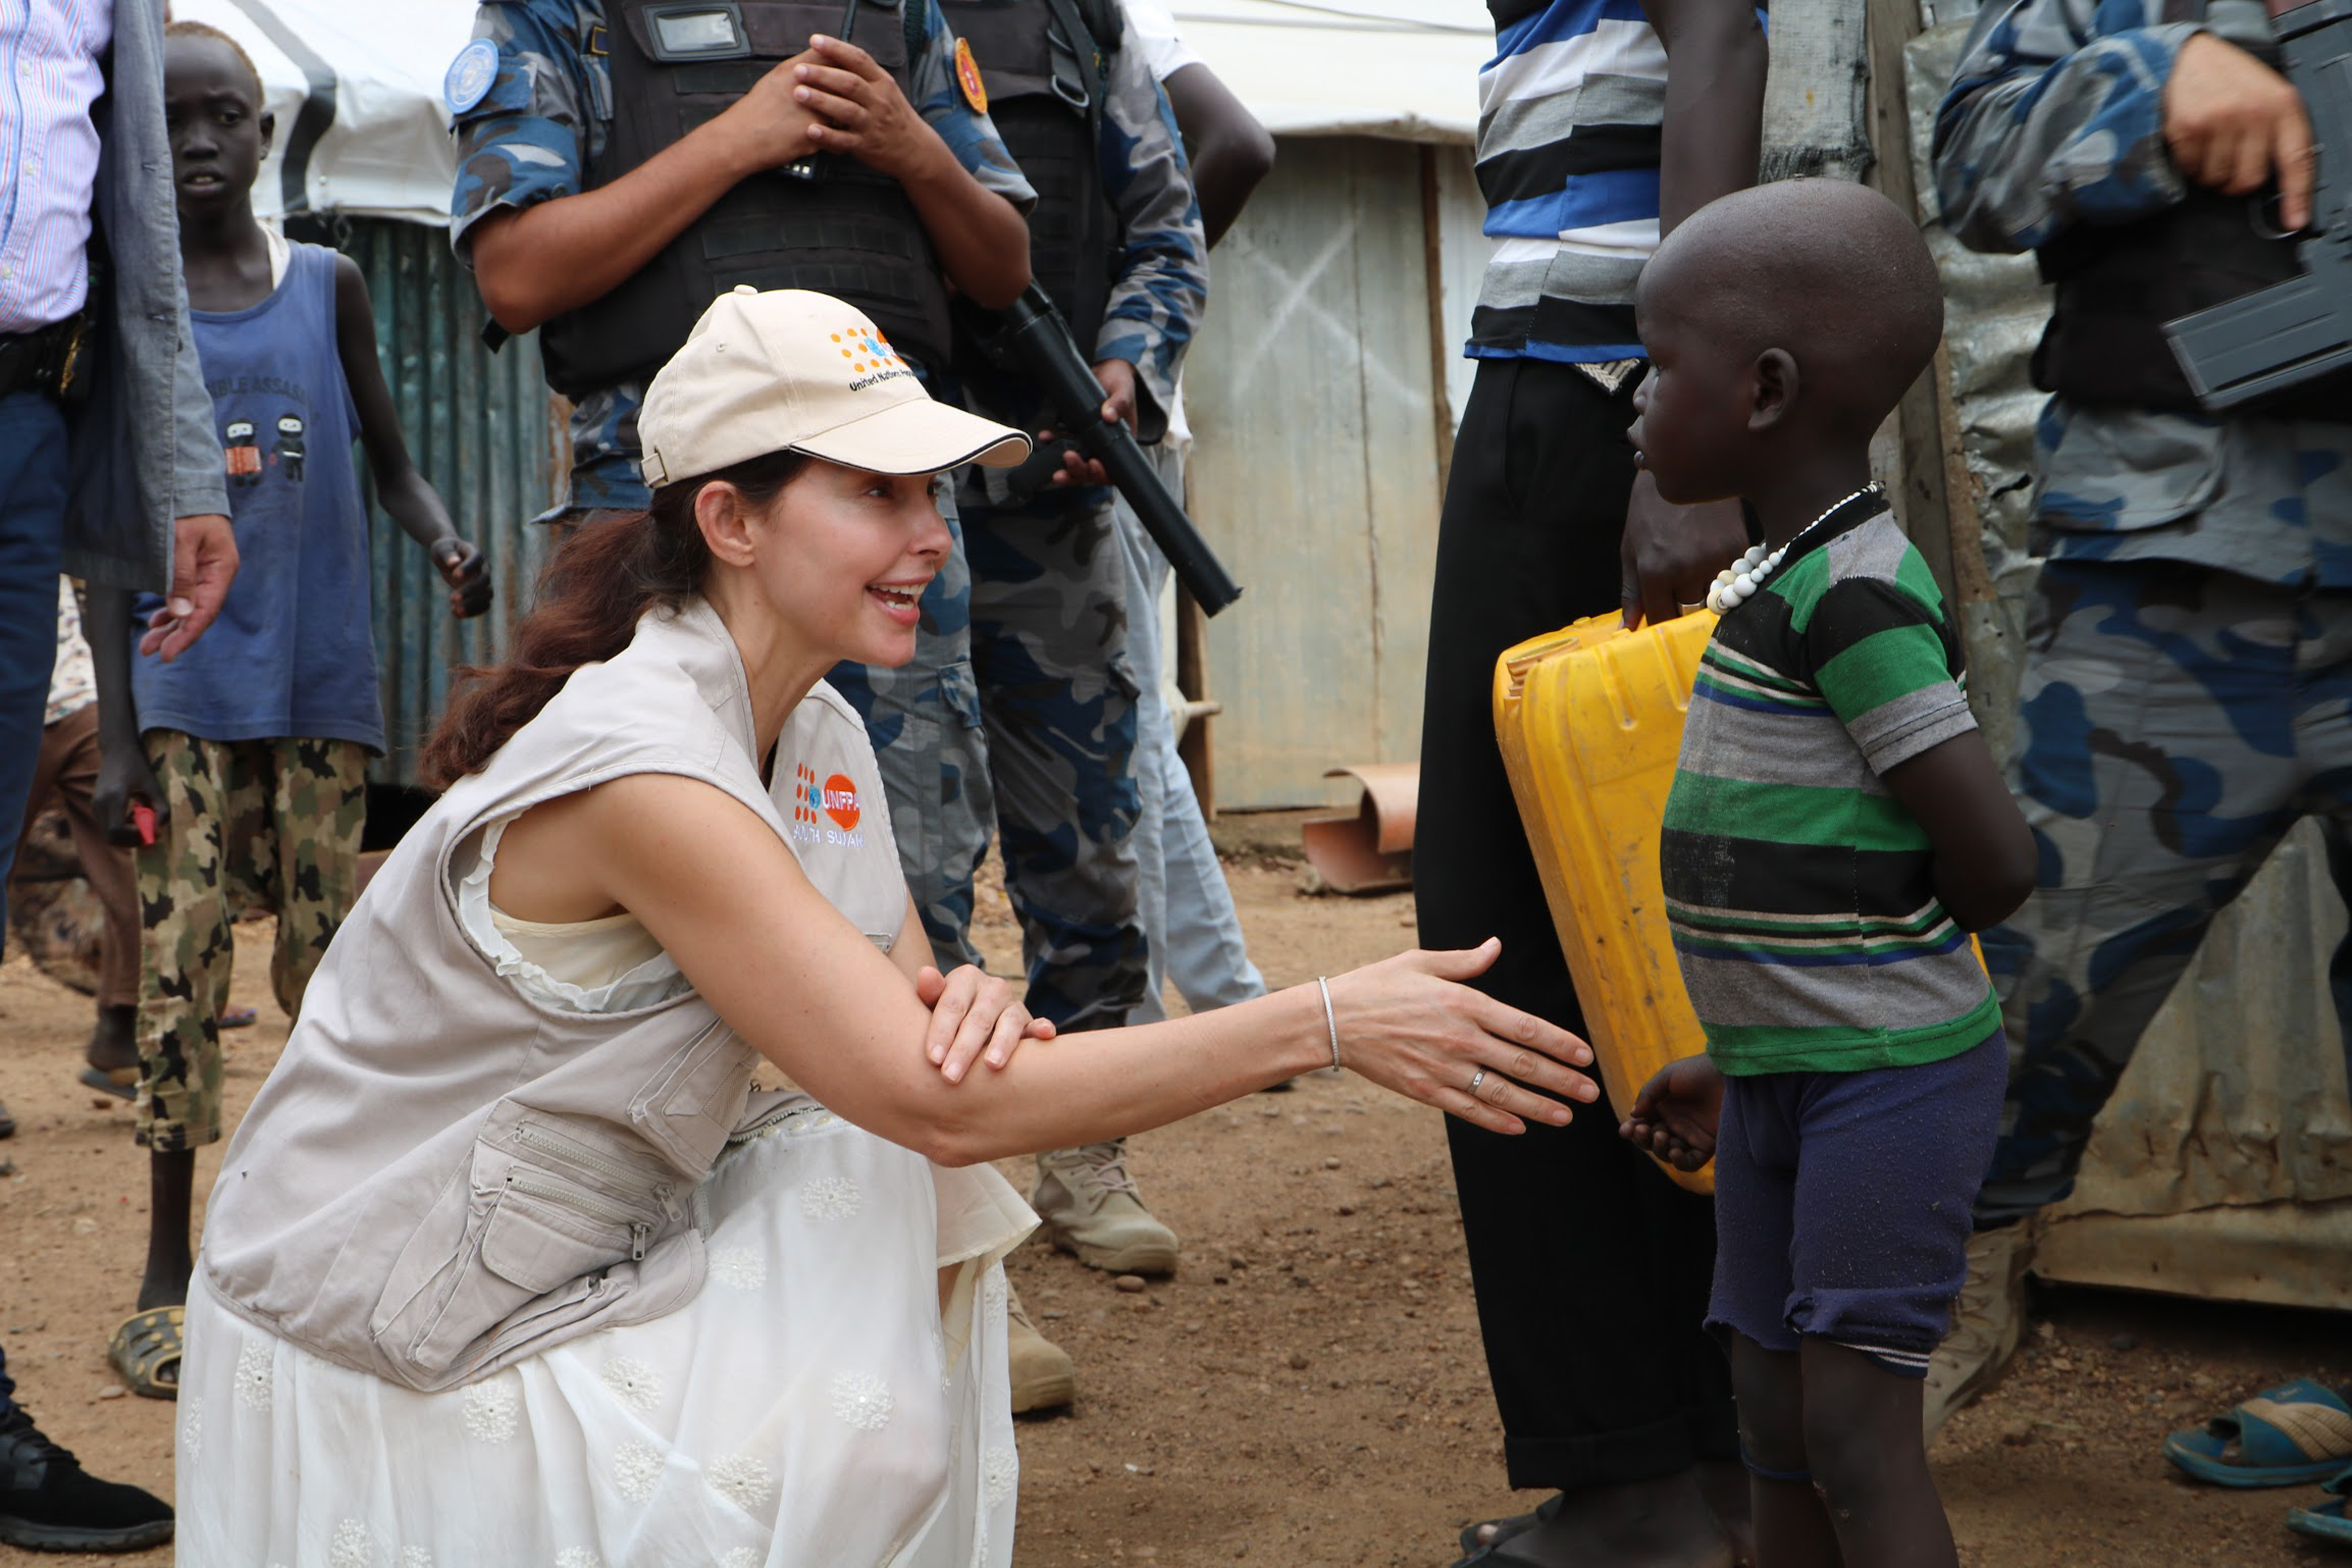 Actress Ashley Judd meets a young refugee in Juba, South Sudan